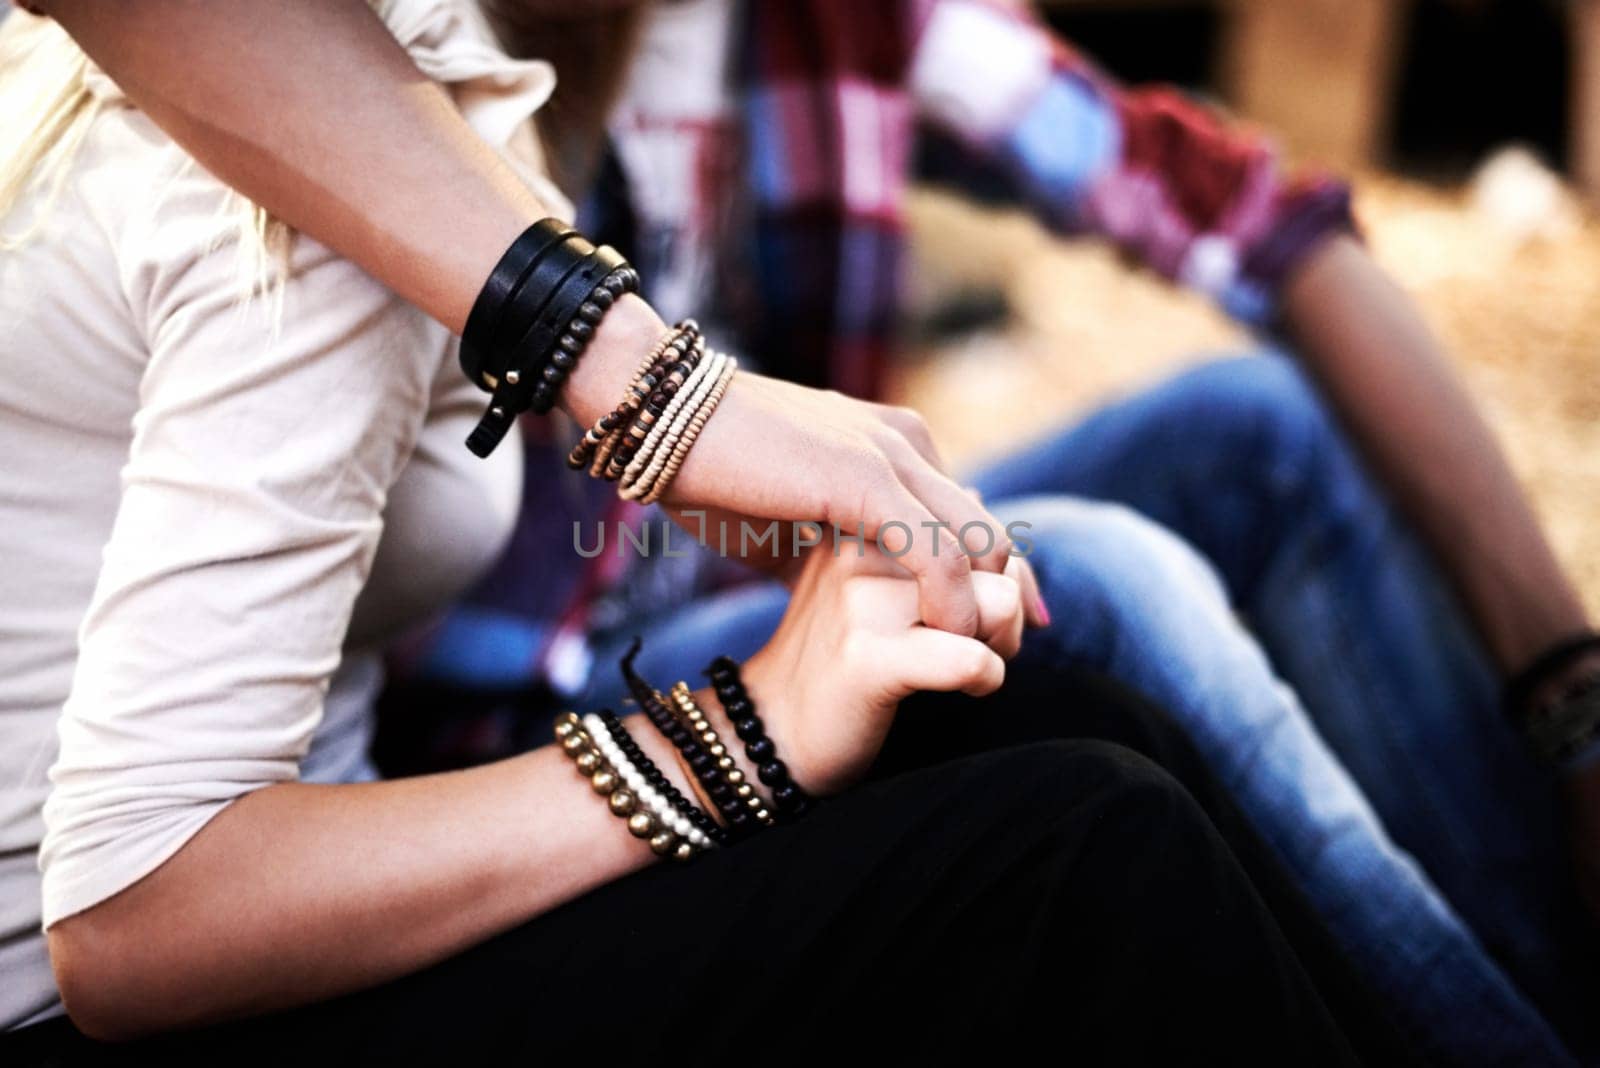 Love, date and a couple holding hands at a music festival outdoor together closeup for romance or bonding. Party, concert or event with a man and woman in the audience or crowd for a carnival show.